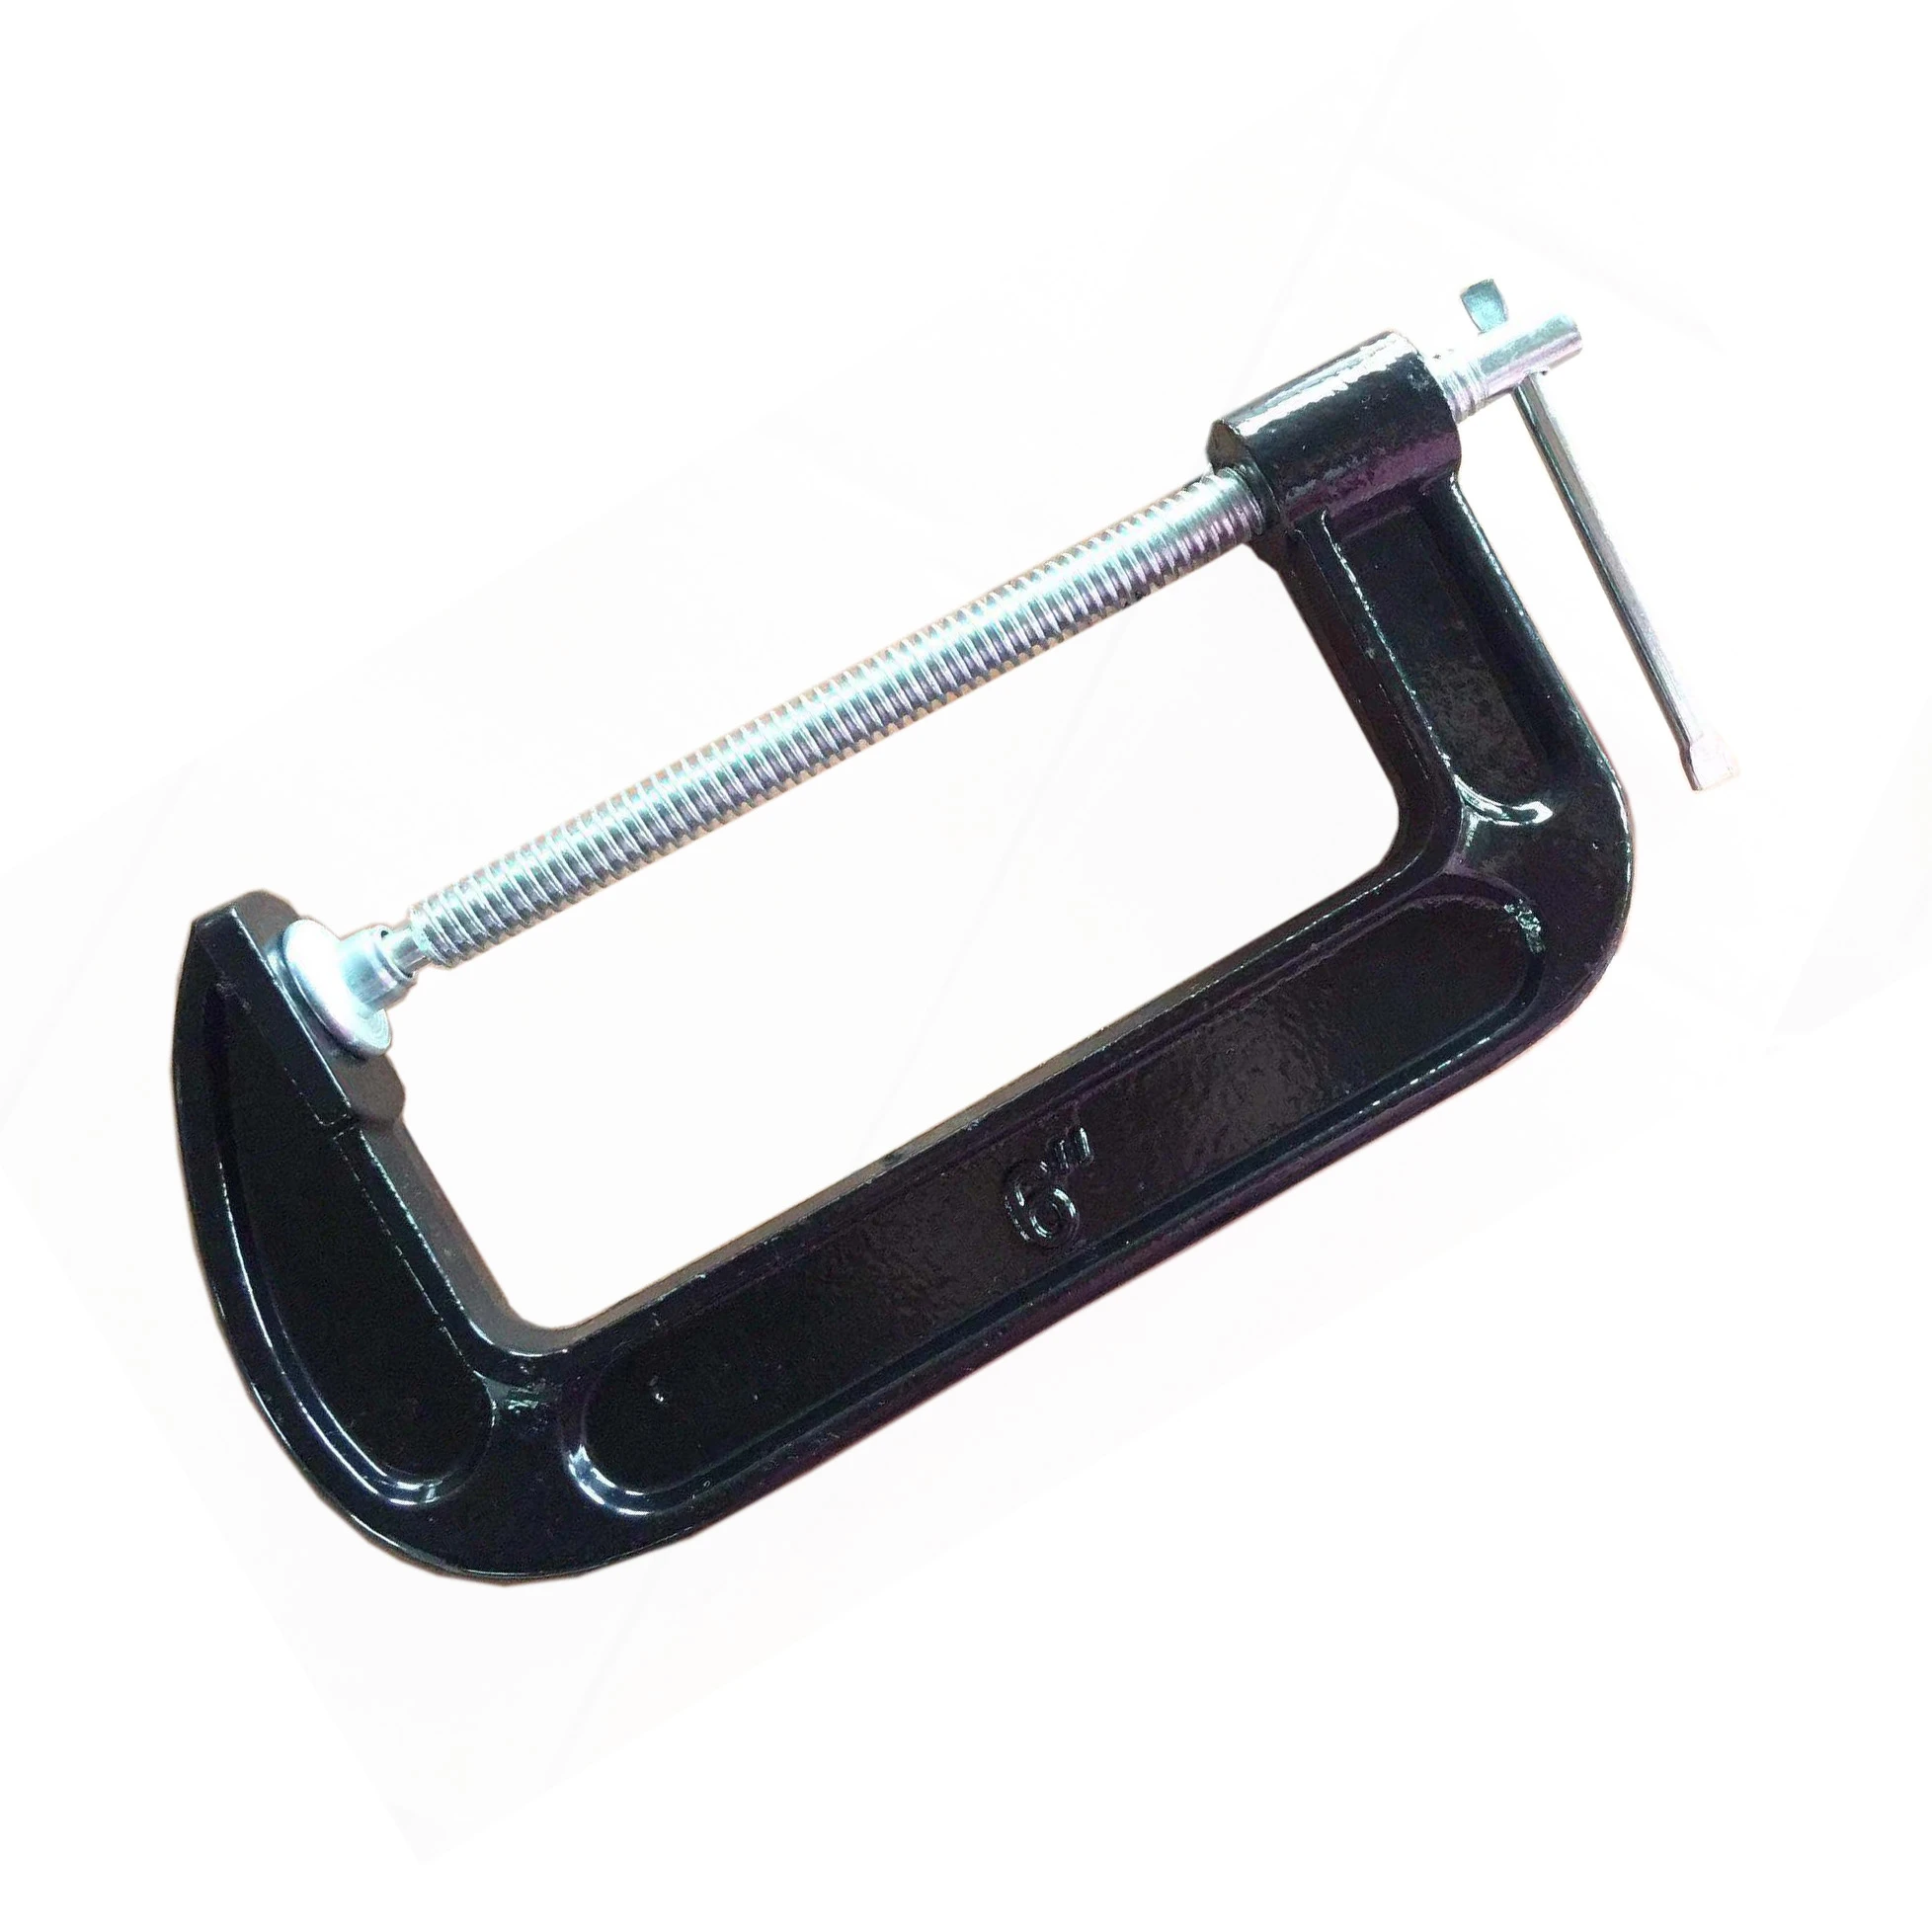 12345681012 inch C Clamps Good Quality Forged Steel G-clamps